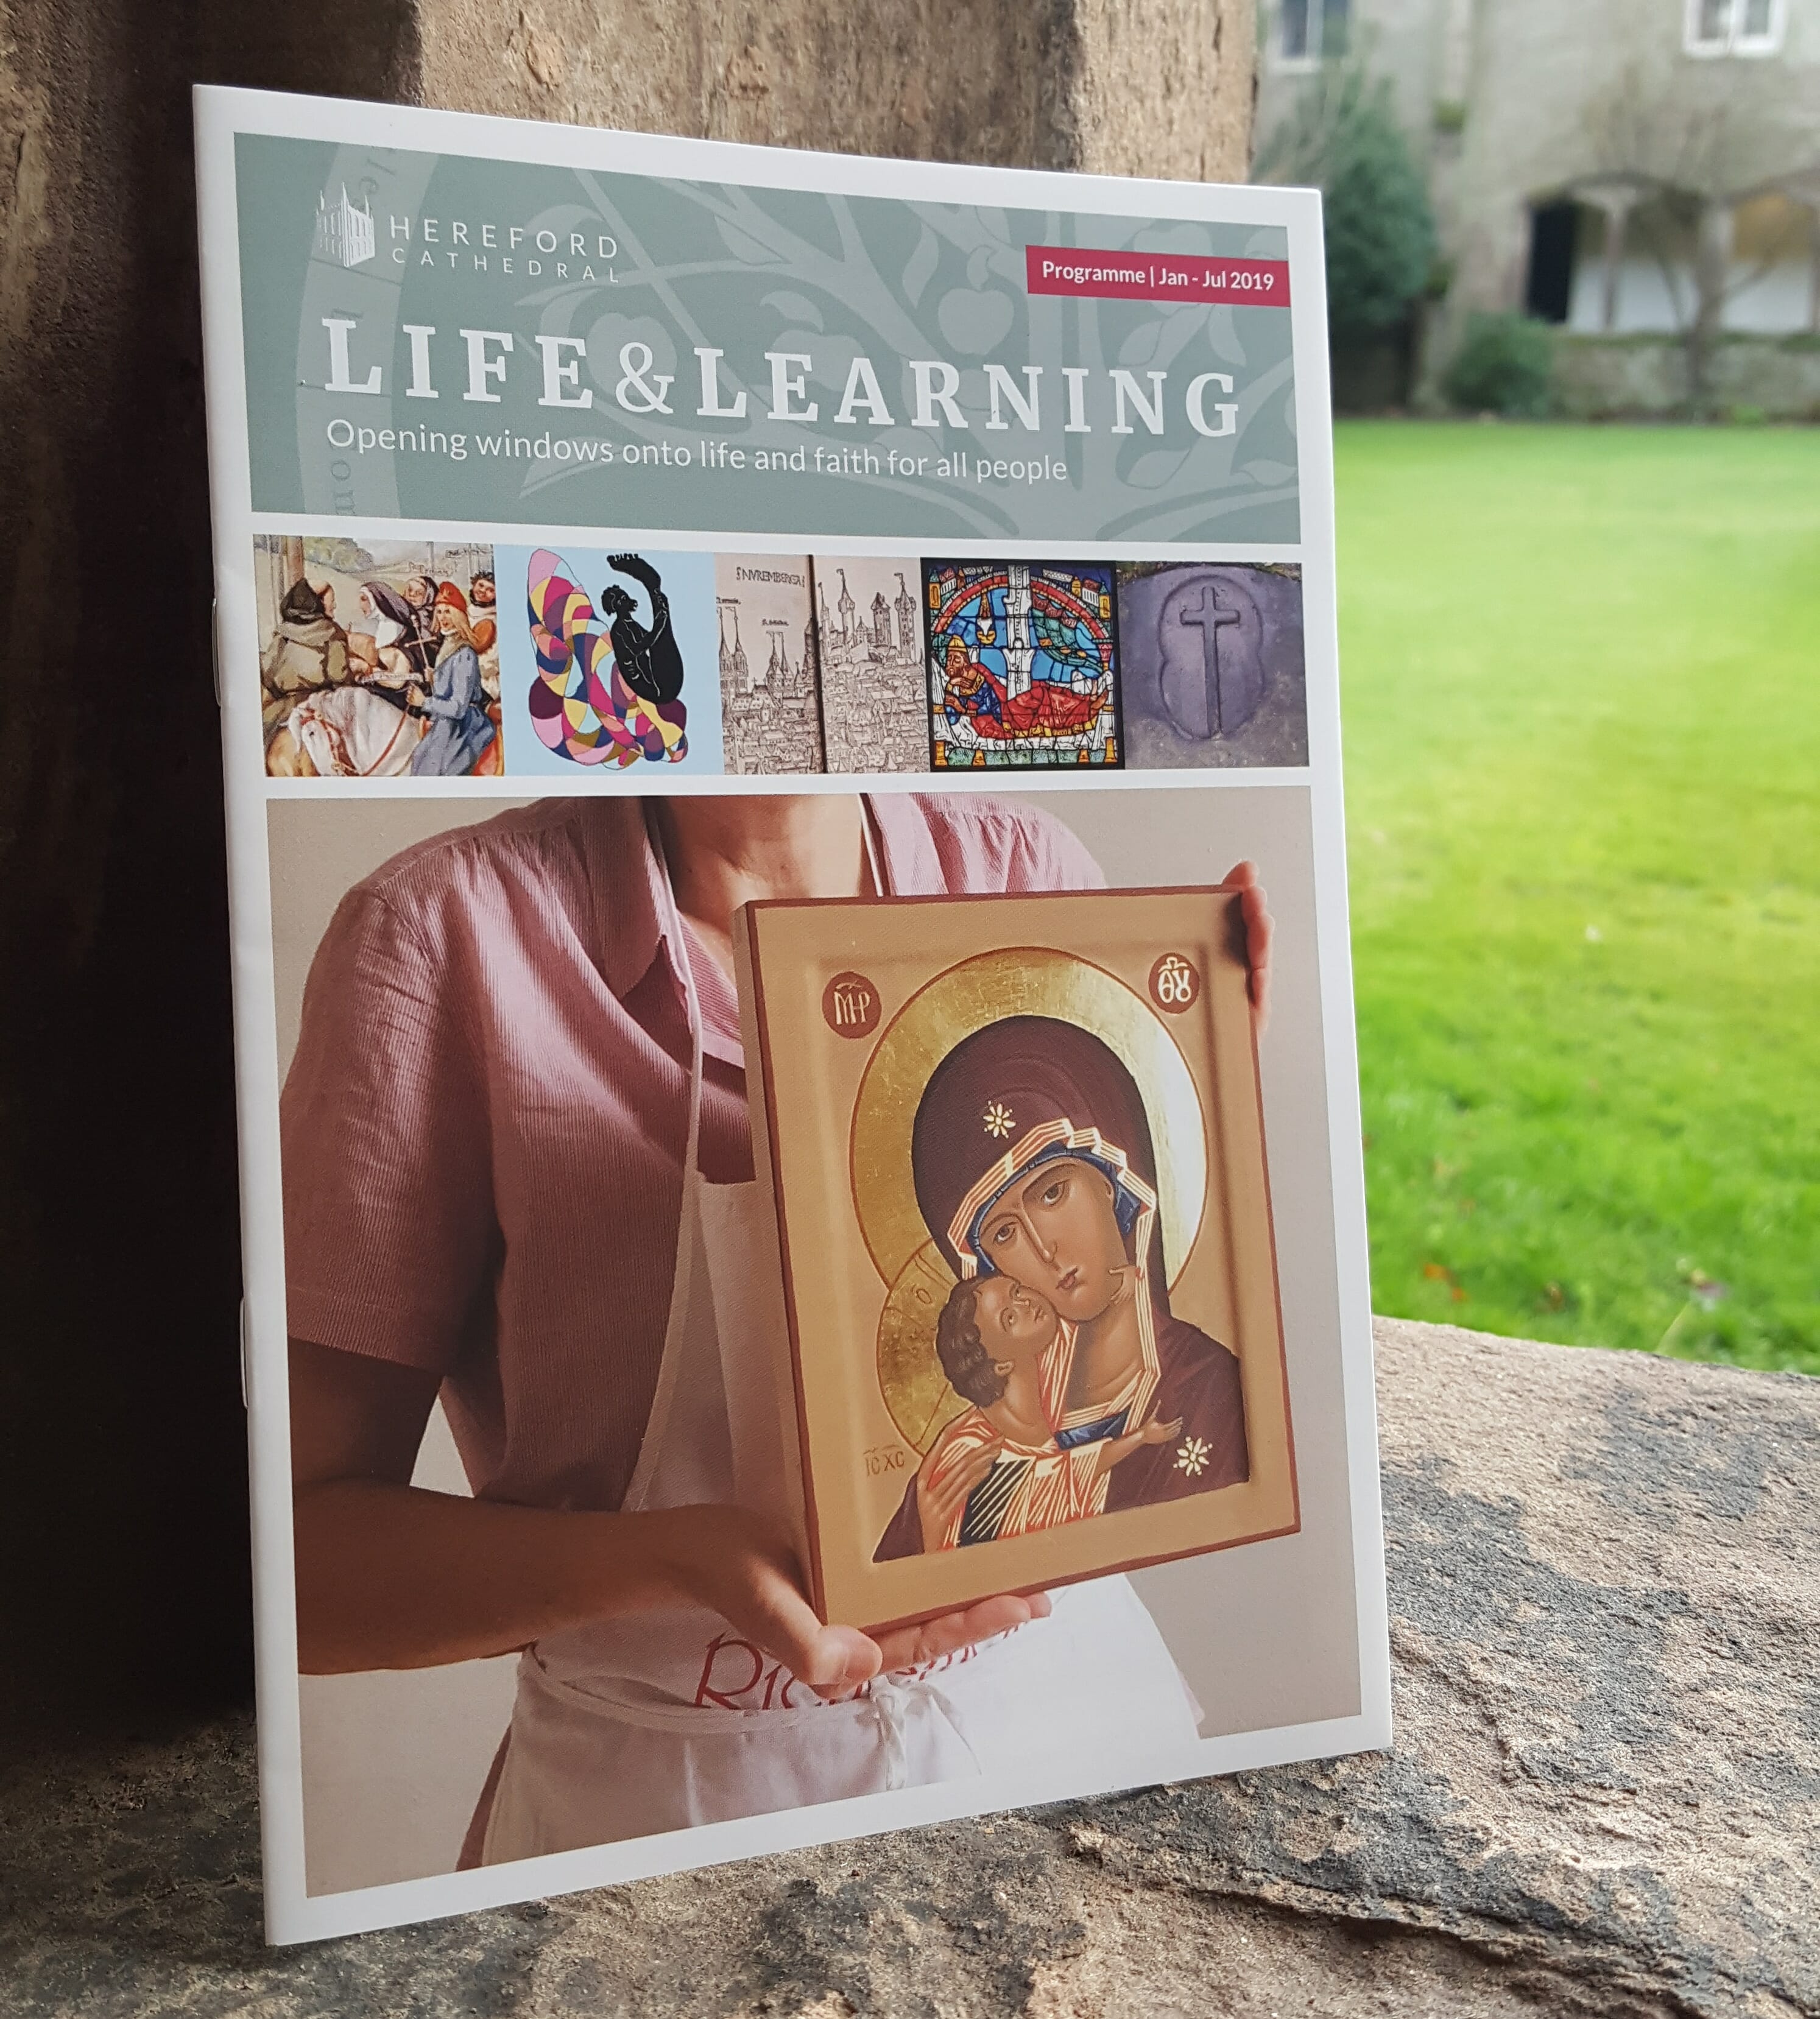 Life & Learning at Hereford Cathedral